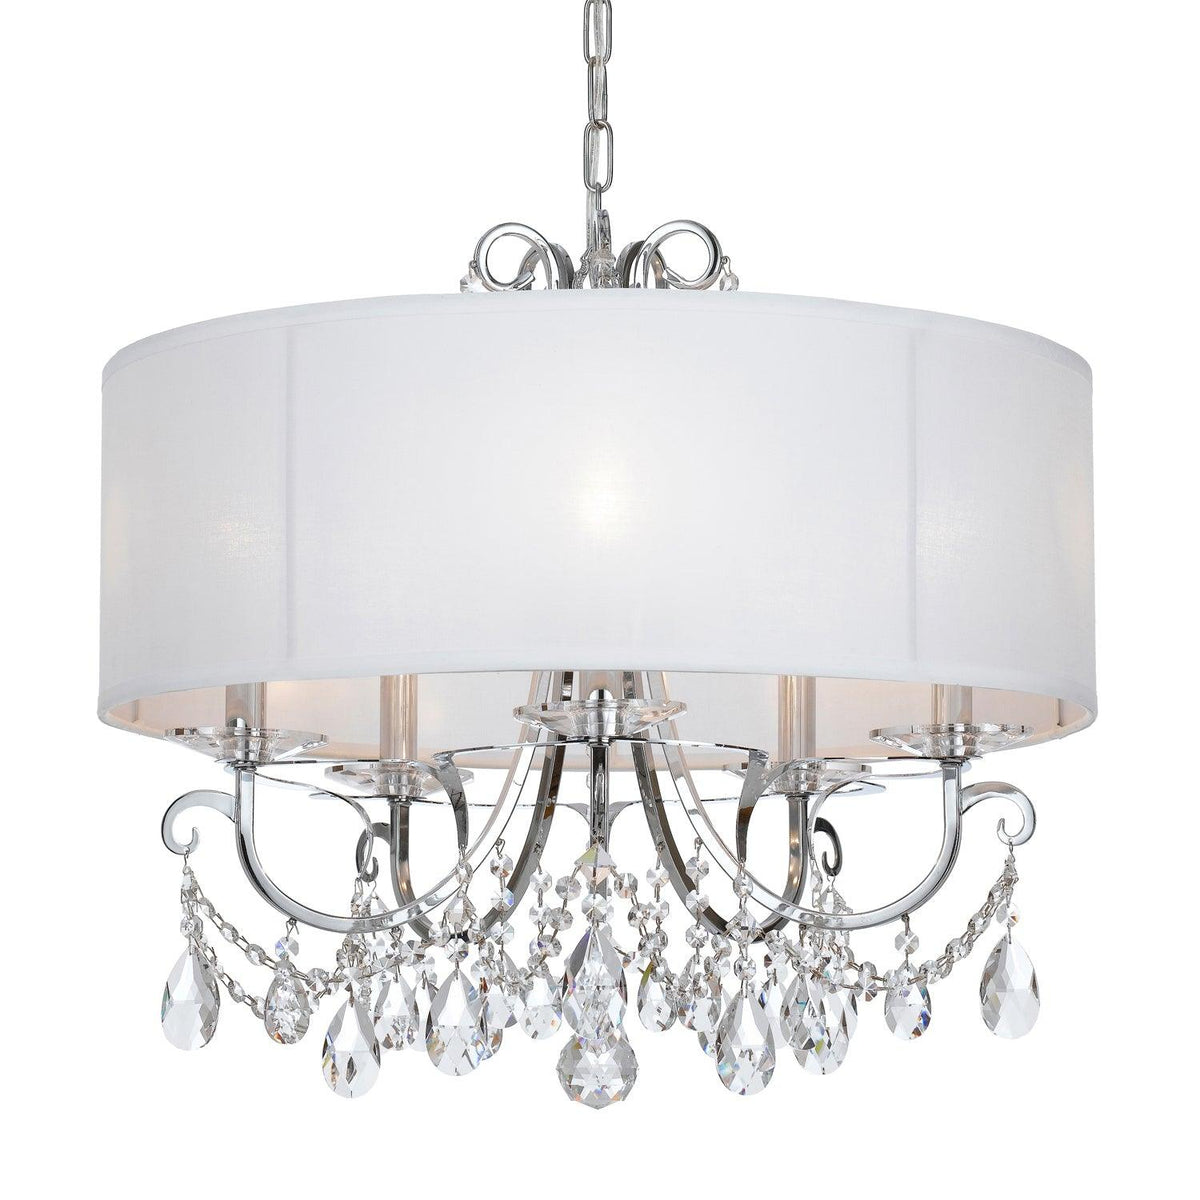 Crystorama - Othello Drum Shade Chandelier - 6625-CH-CL-SAQ | Montreal Lighting & Hardware